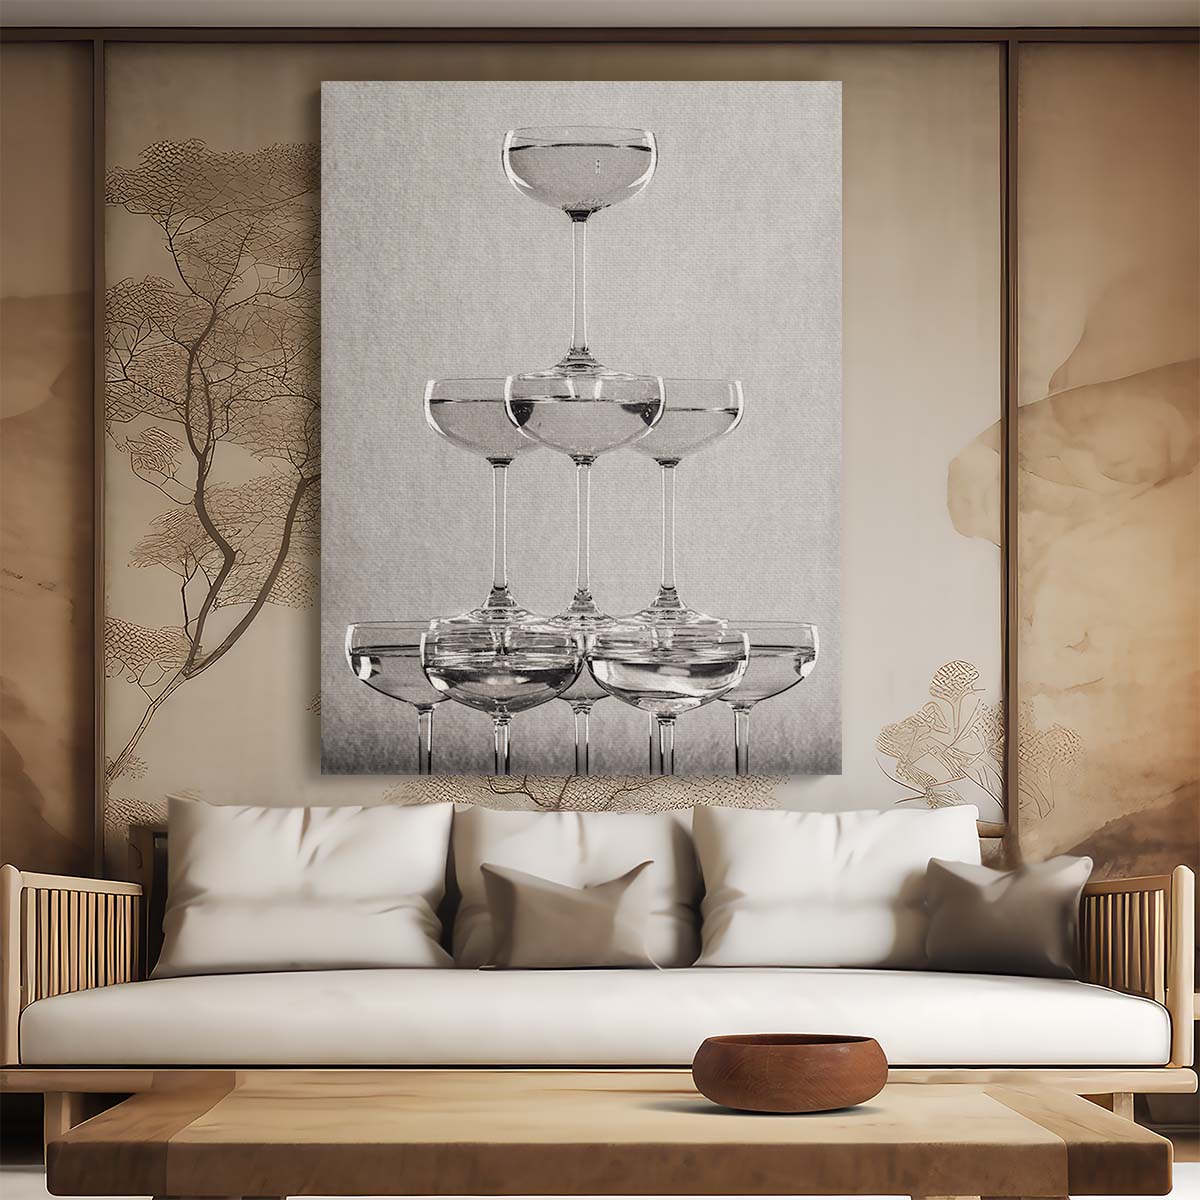 Monochrome Still Life Photography of Vintage Champagne Glass Tower by Luxuriance Designs, made in USA